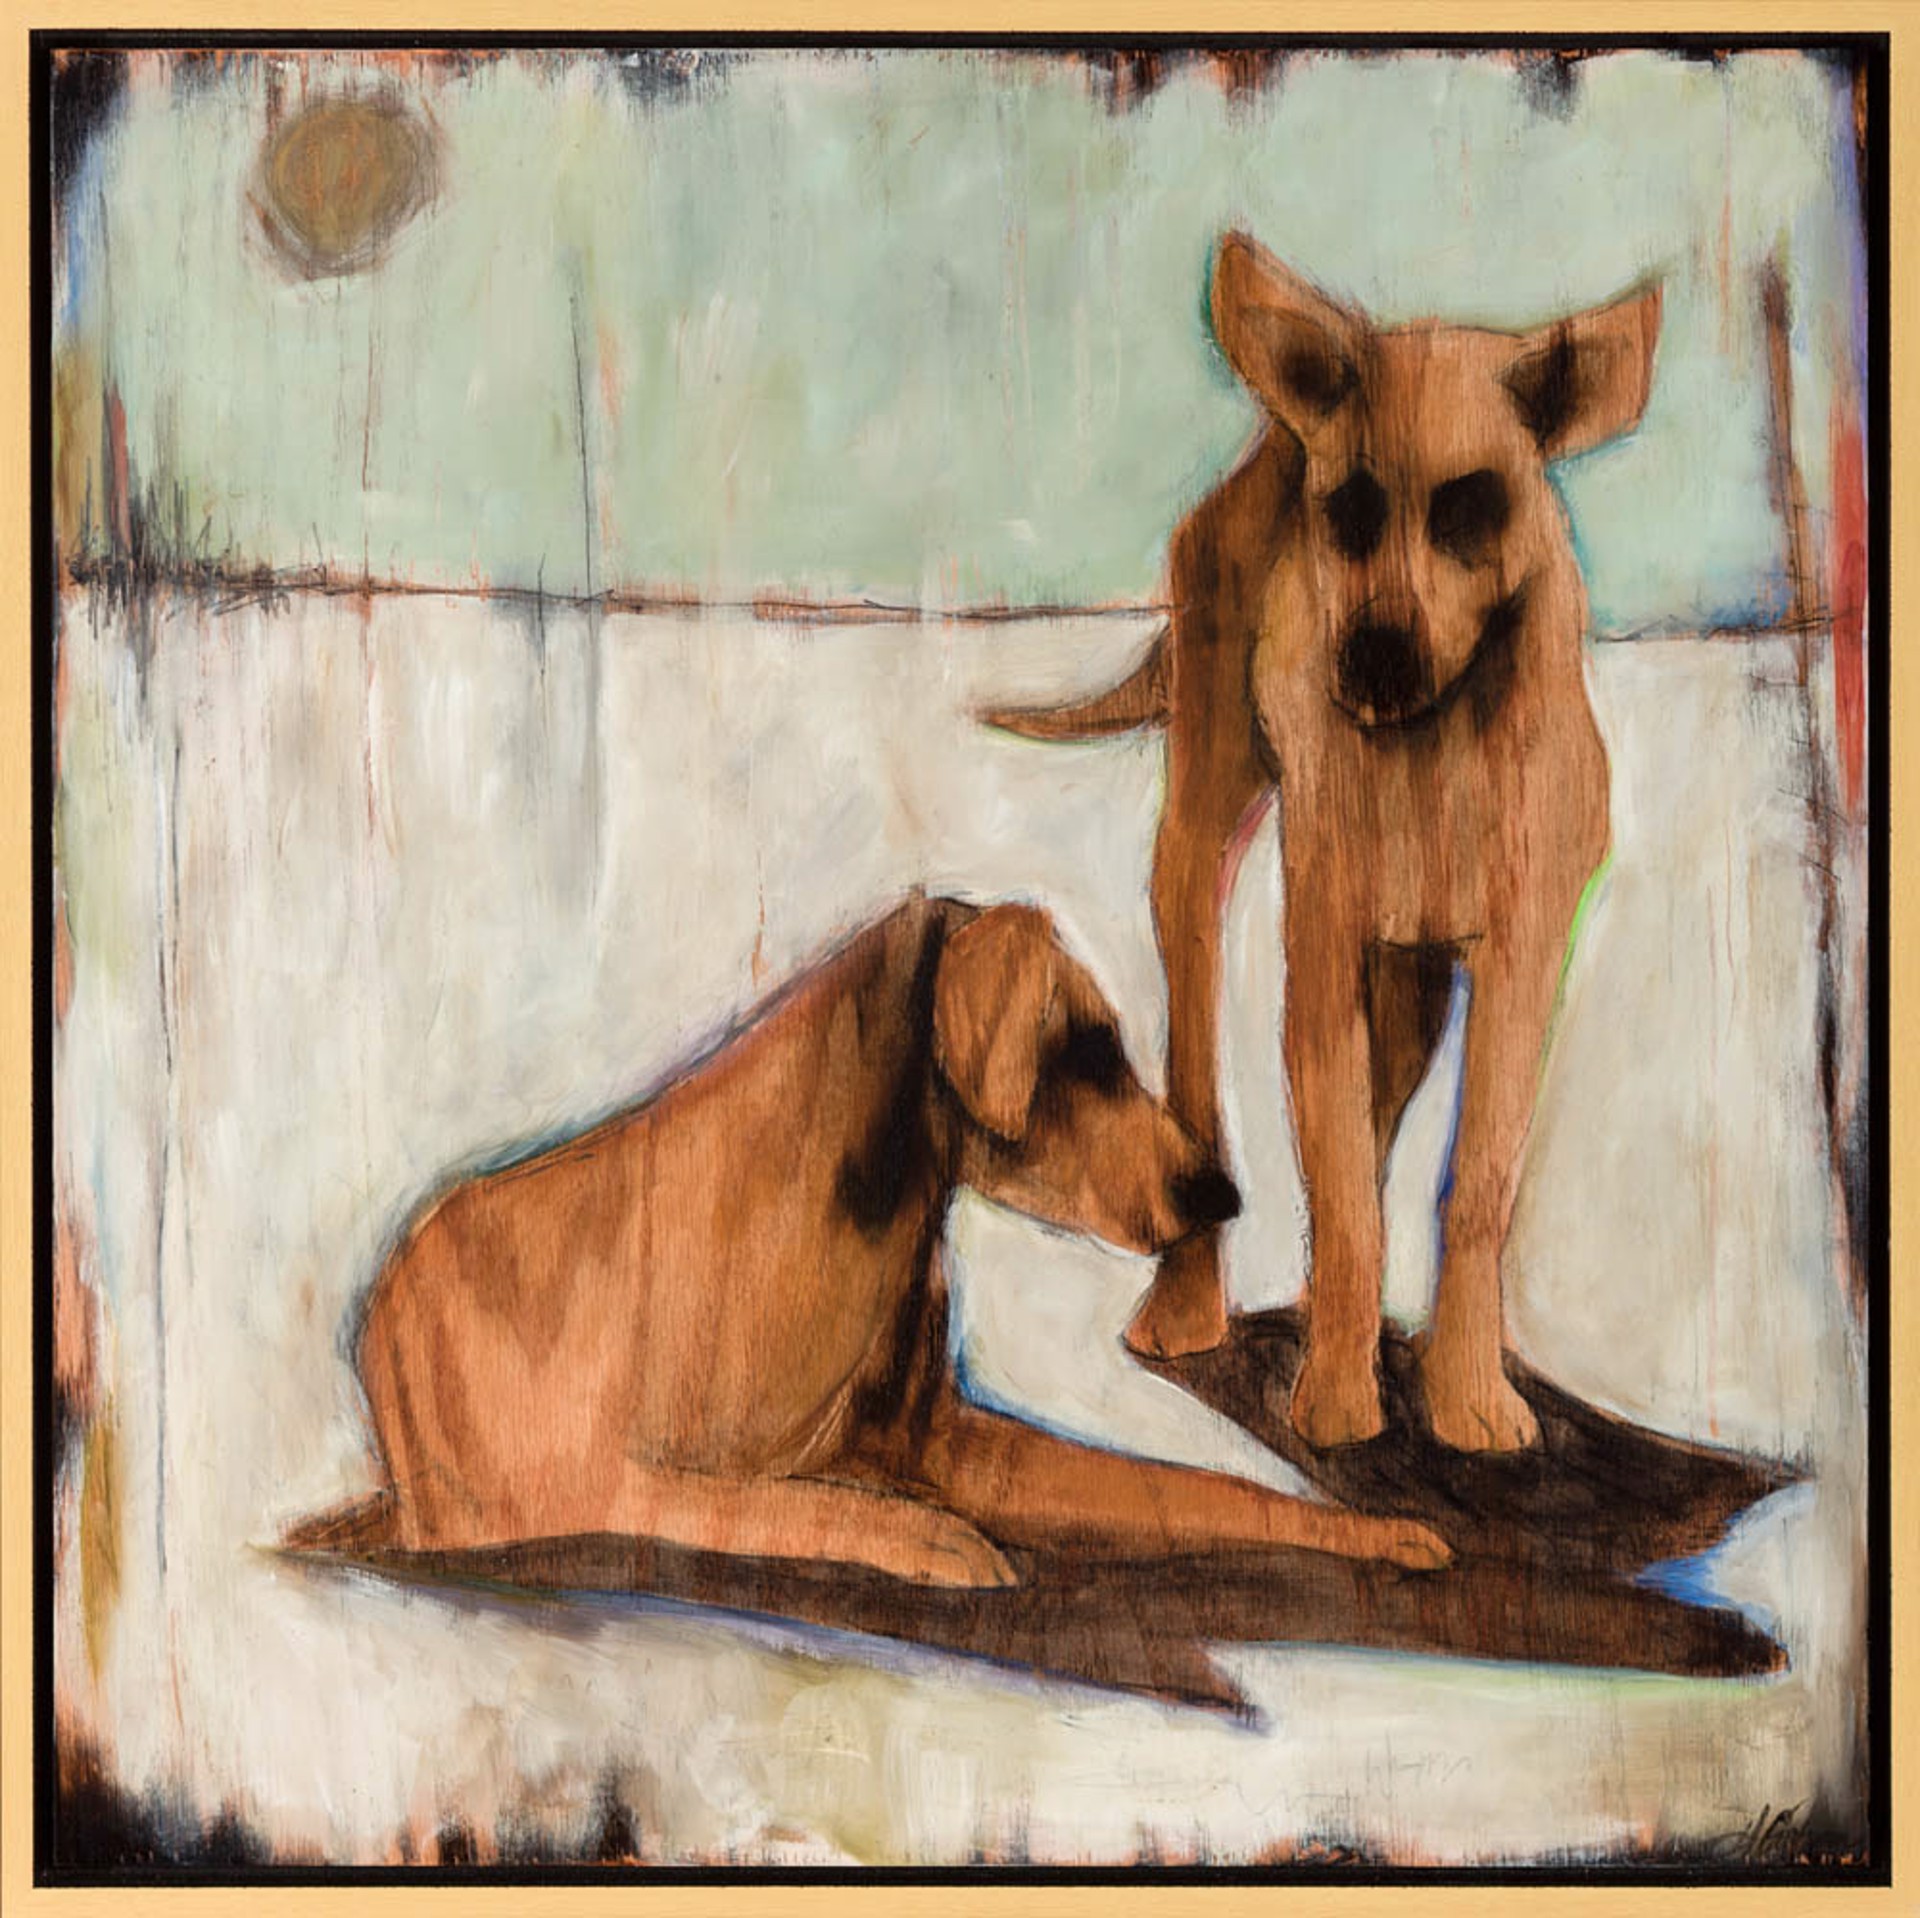 Dog Thoughts VIII by Heather Gorham